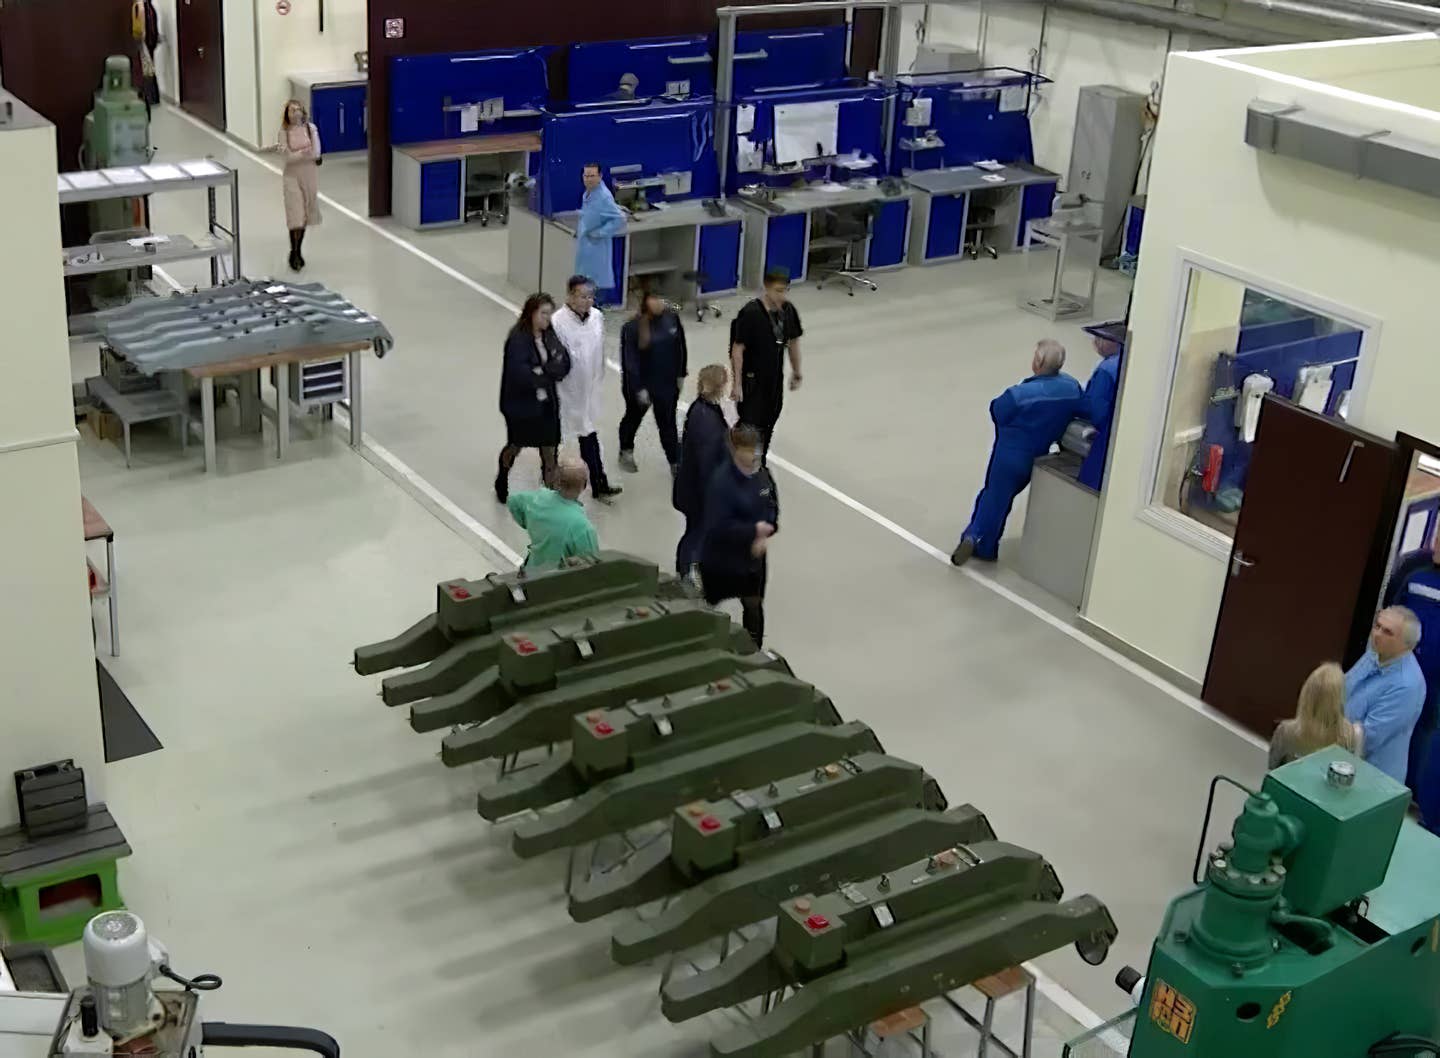 The Vympel facility in Moscow, where launchers for LMUR missiles, single APU-305 (at the rear), and double APU-L (at the front) are produced. <em>Russian TV screencap</em>